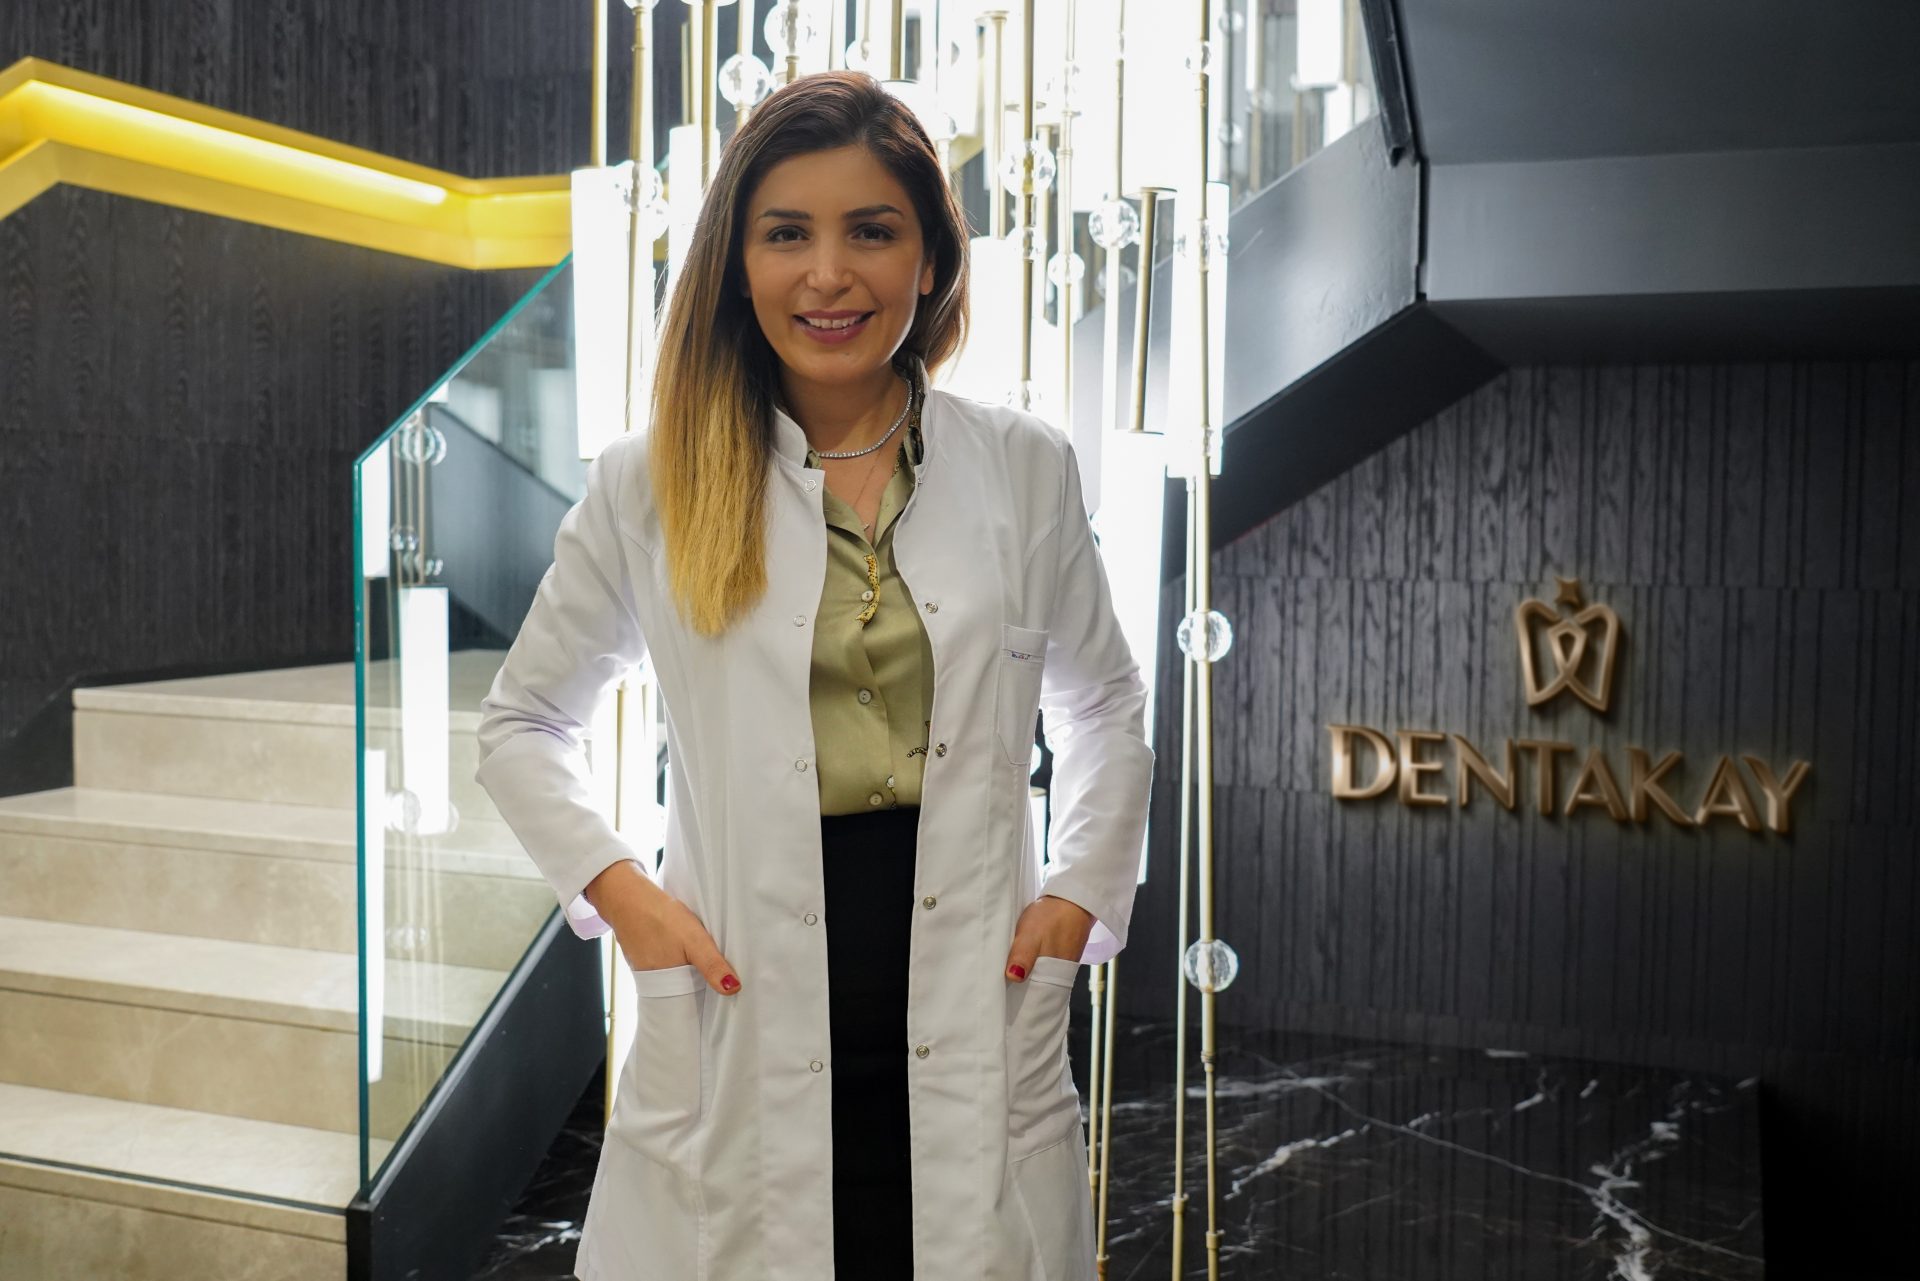 Two Miss England winners & Miss England Director visit Istanbul to meet the founder of Dentakay “Dr Gulay Akay” the Dental partner for Miss England 2022!